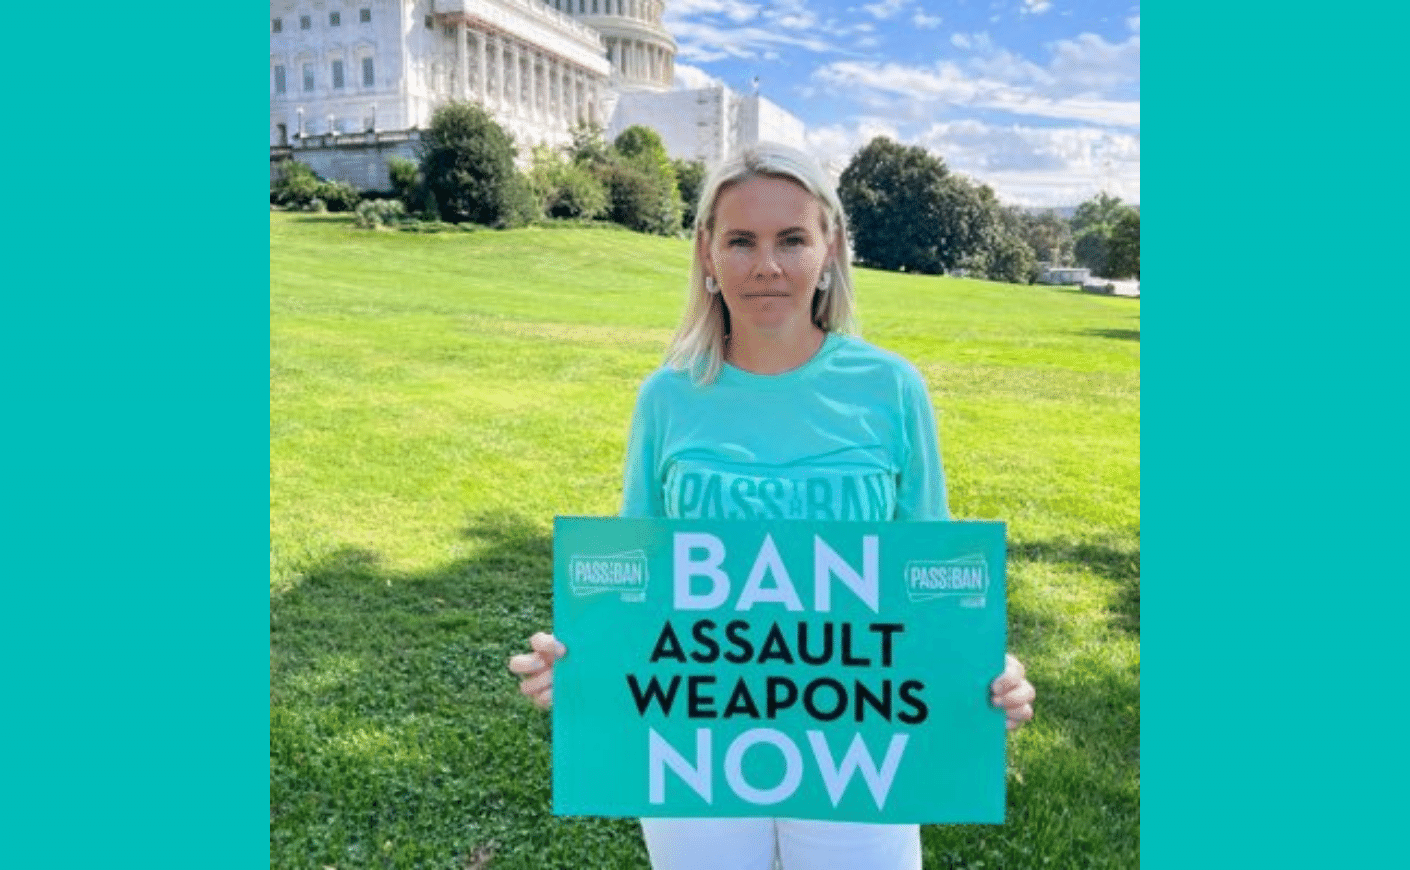 kitty brandtner stands in front of the capitol with a sign that says "ban assault weapons now"